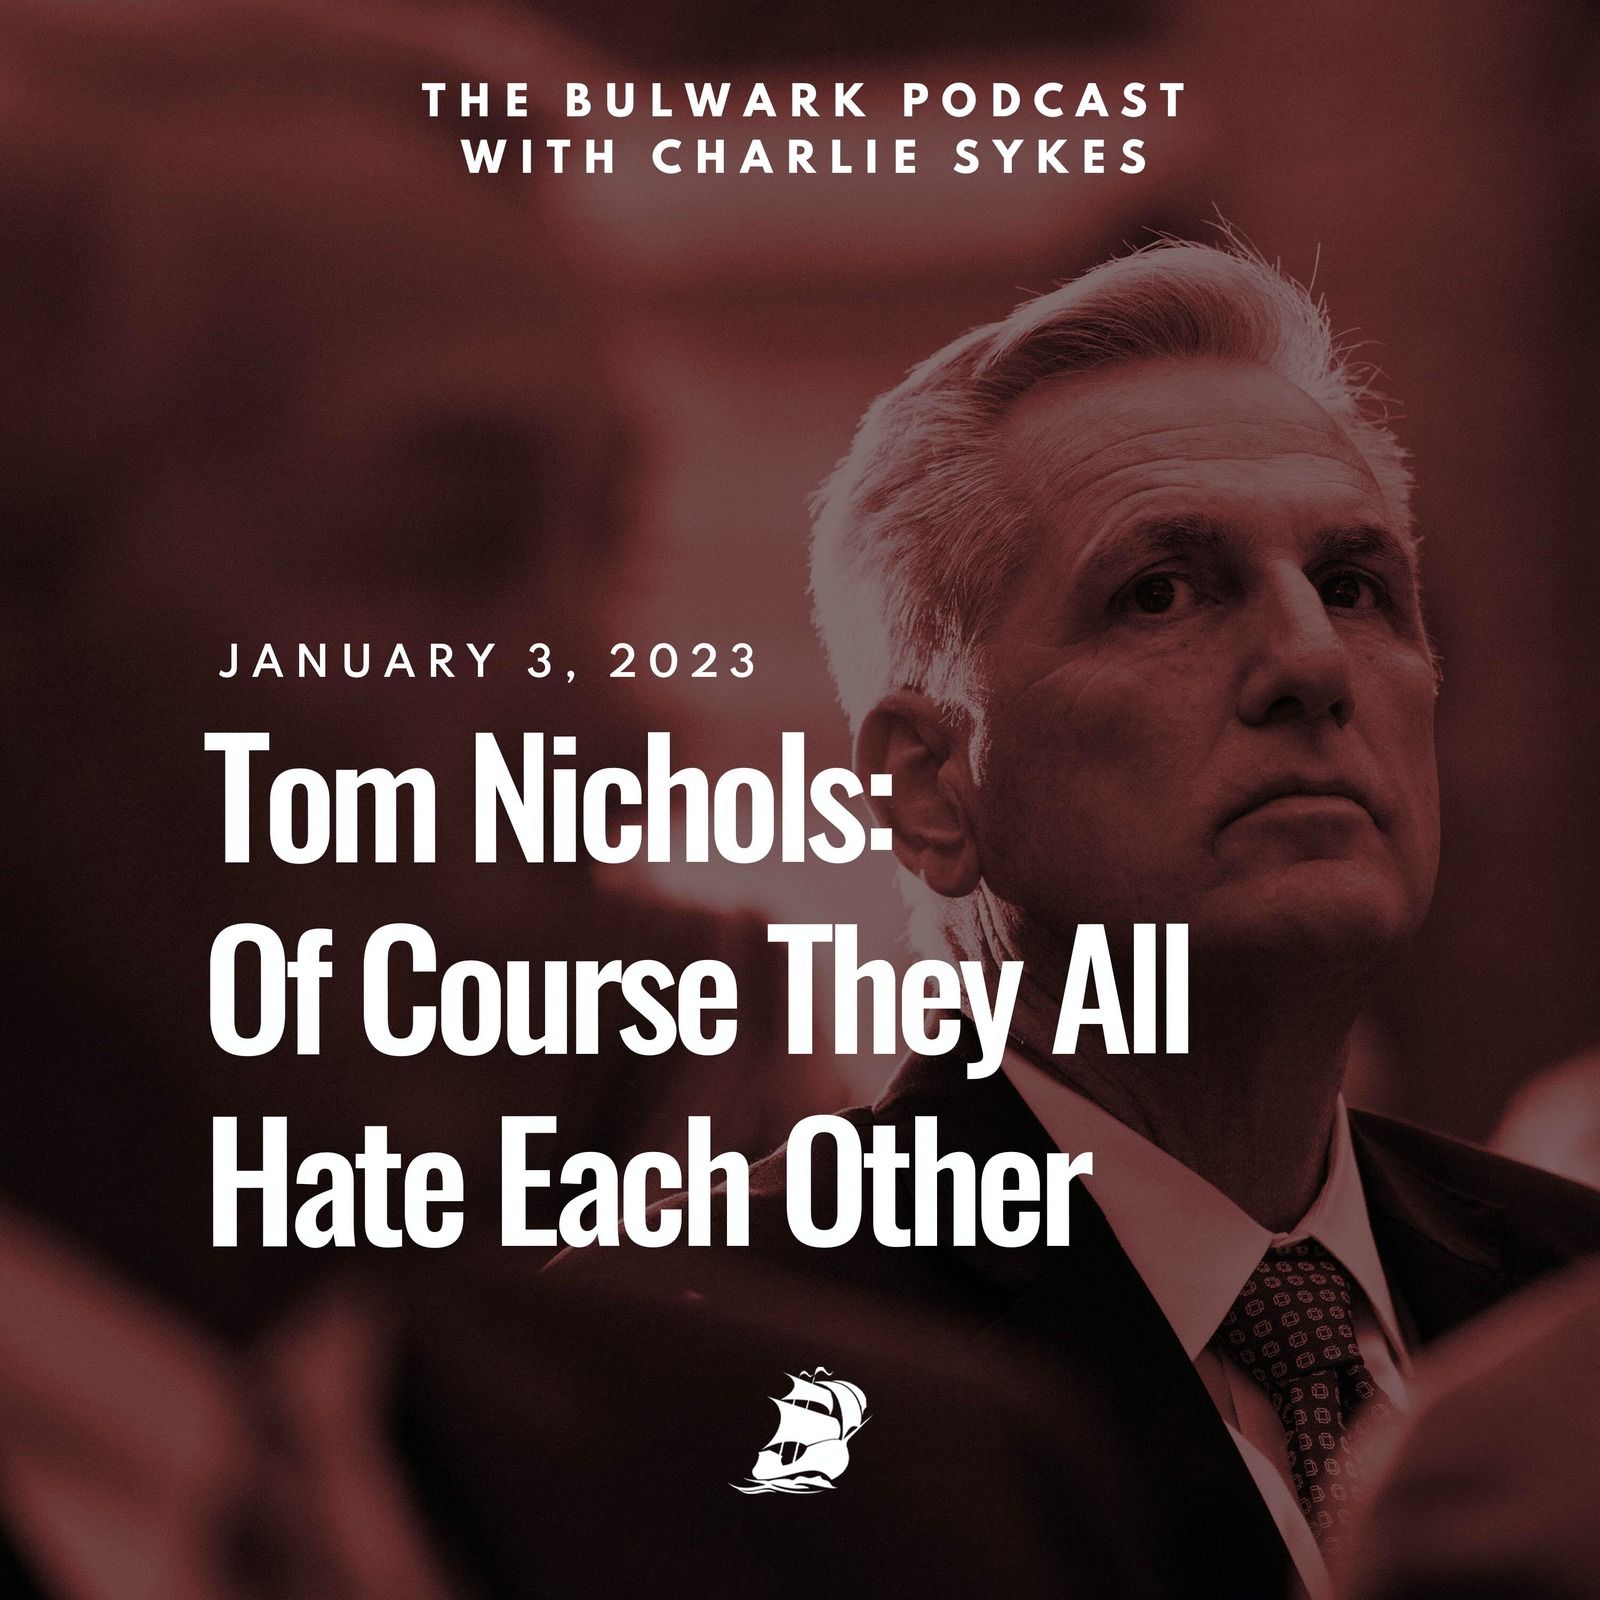 Tom Nichols: Of Course They All Hate Each Other